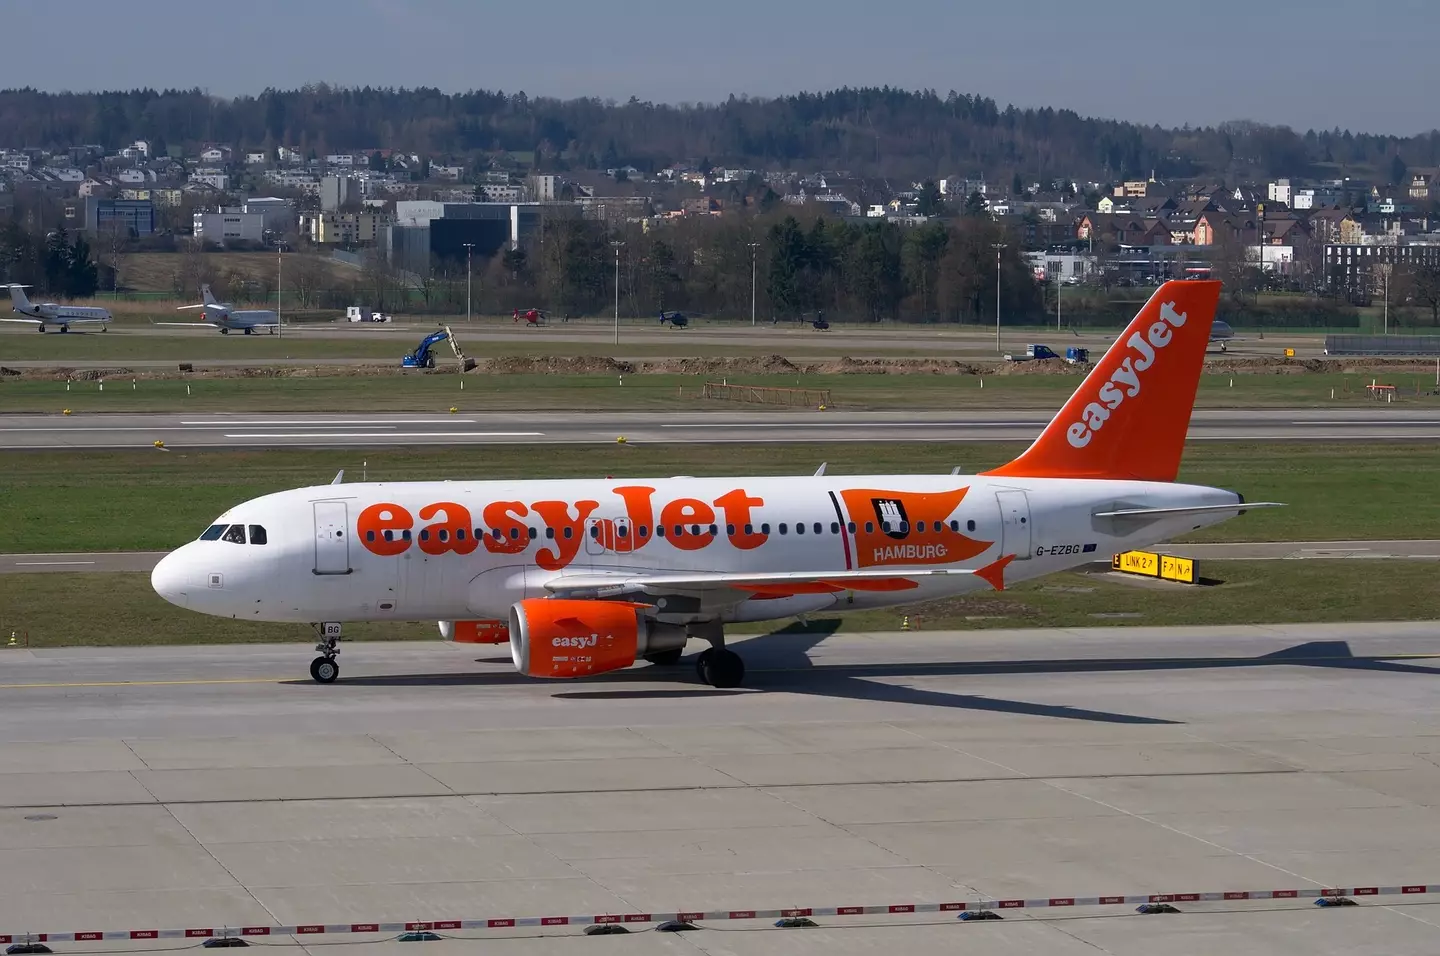 The two customers claim to have been banned from EasyJet for 2 years.